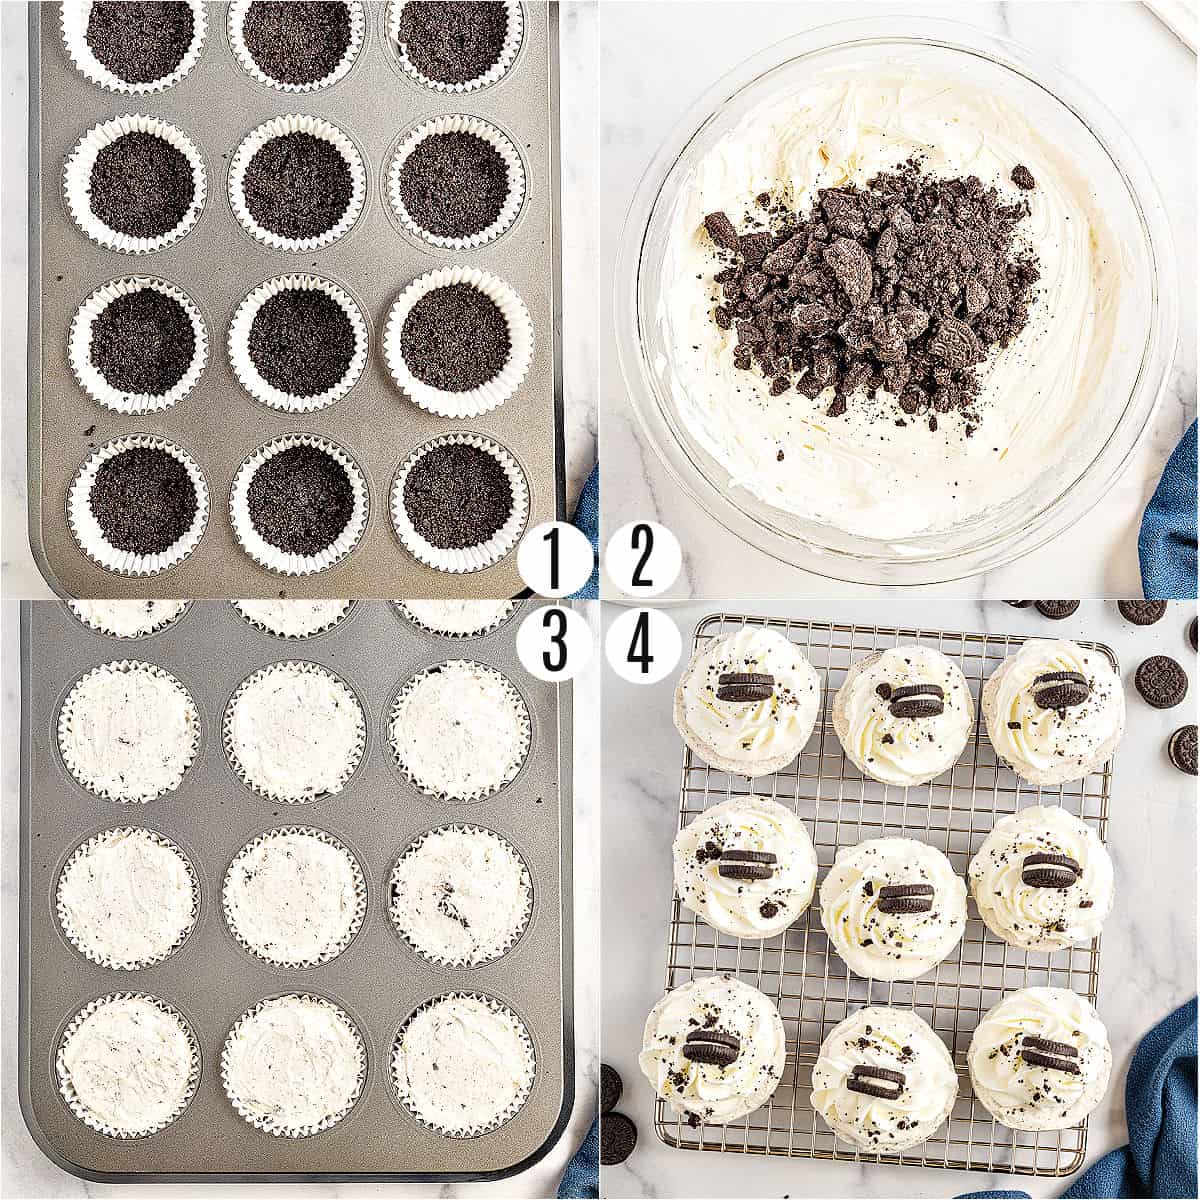 Step by step photos showing how to make mini oreo cheesecakes.